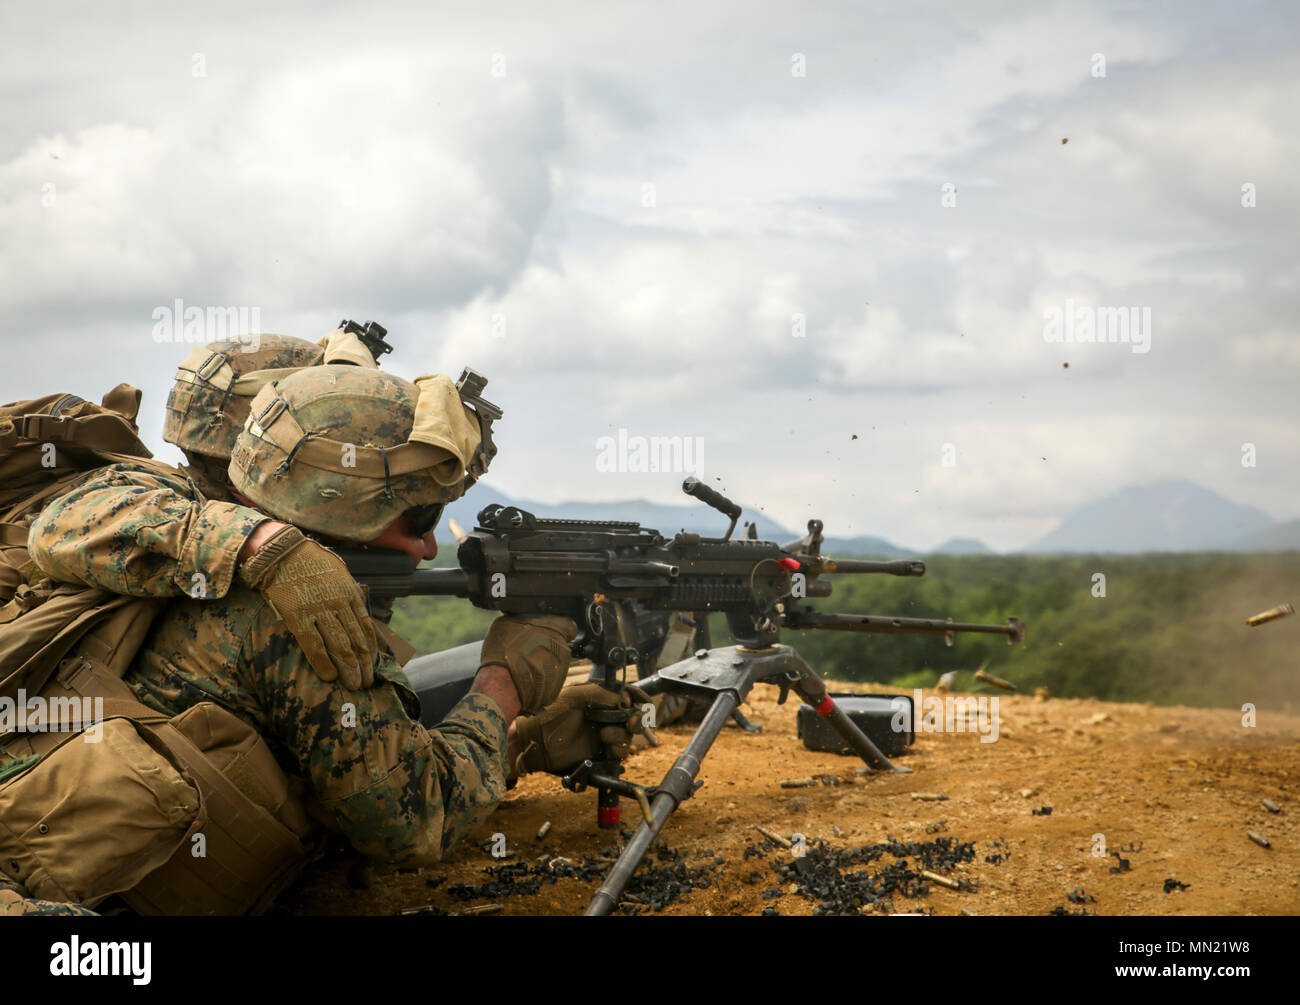 Lance Cpl. Quinn Gurn (left) feeds ammunition into Lance Cpl. Jaziel Lopezrosado's (right) M240B machine gun Aug. 16, 2017 at the live fire range in Hokudaien, Japan, during Northern Viper 17. The service members assaulted the target by cover and maneuver and suppressed fire from Japanese tanks and U.S. light armored vehicles. The U.S. has a vested interest in a secure Pacific; Combined-joint exercises enhance regional cooperation between participating nations to collectively deter security threats. Gurn, a Greenville, South Carolina native, is a team leader and Lopezrosado, an Arecibo, Puerto Stock Photo